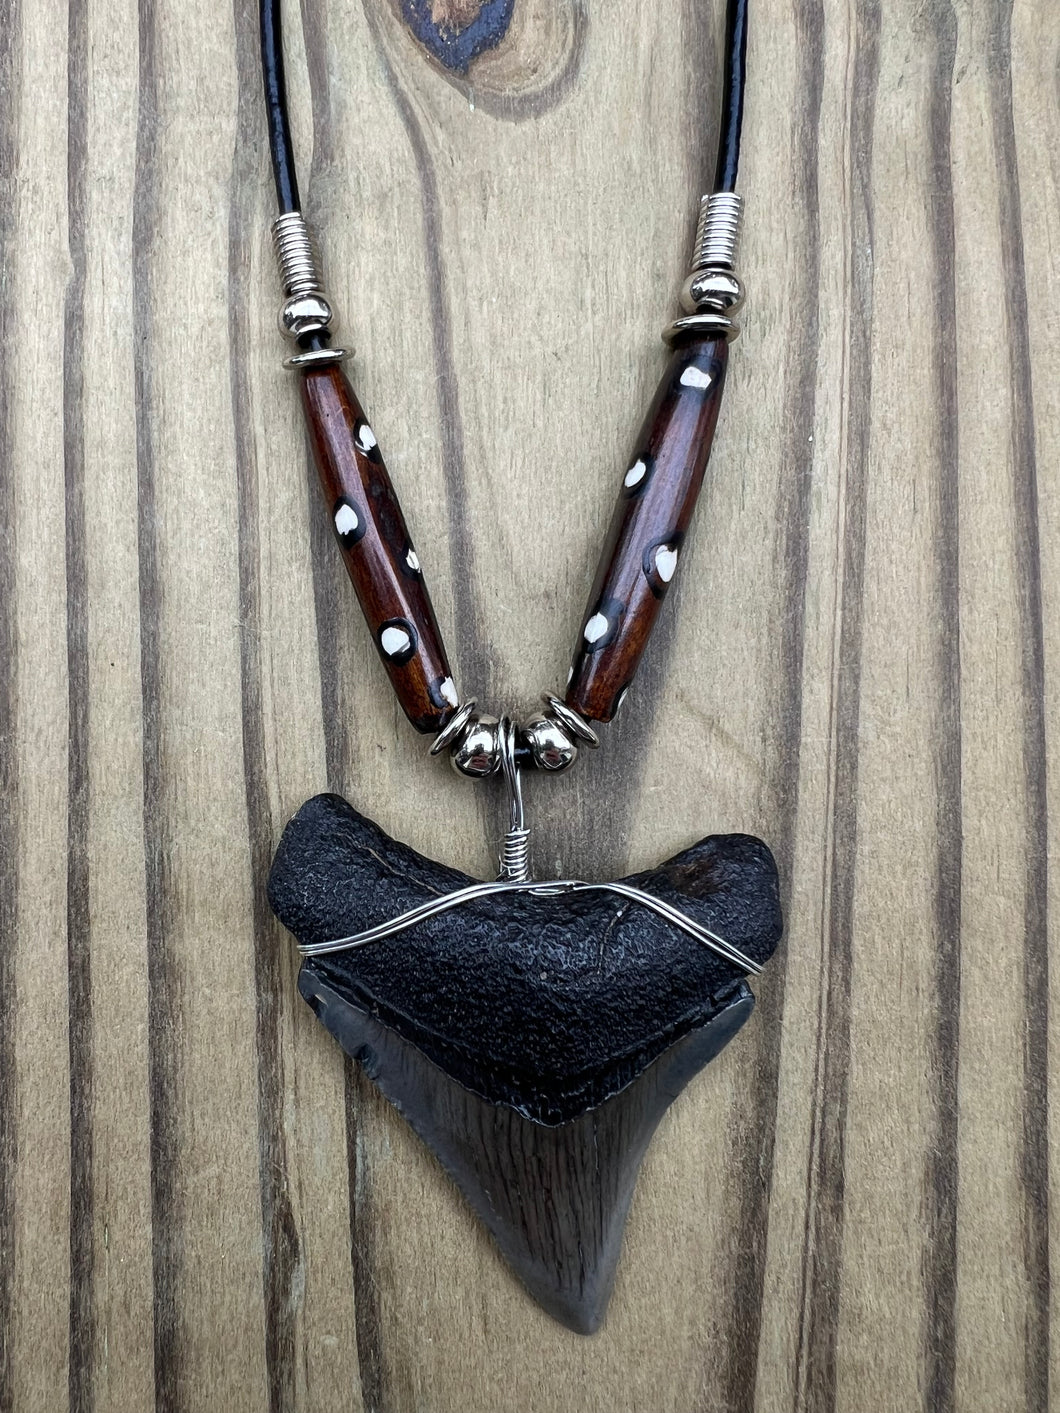 2 1/16 inch Fossilized Megalodon Shark Tooth Necklace Featuring Brown Bone Beads with White Dots